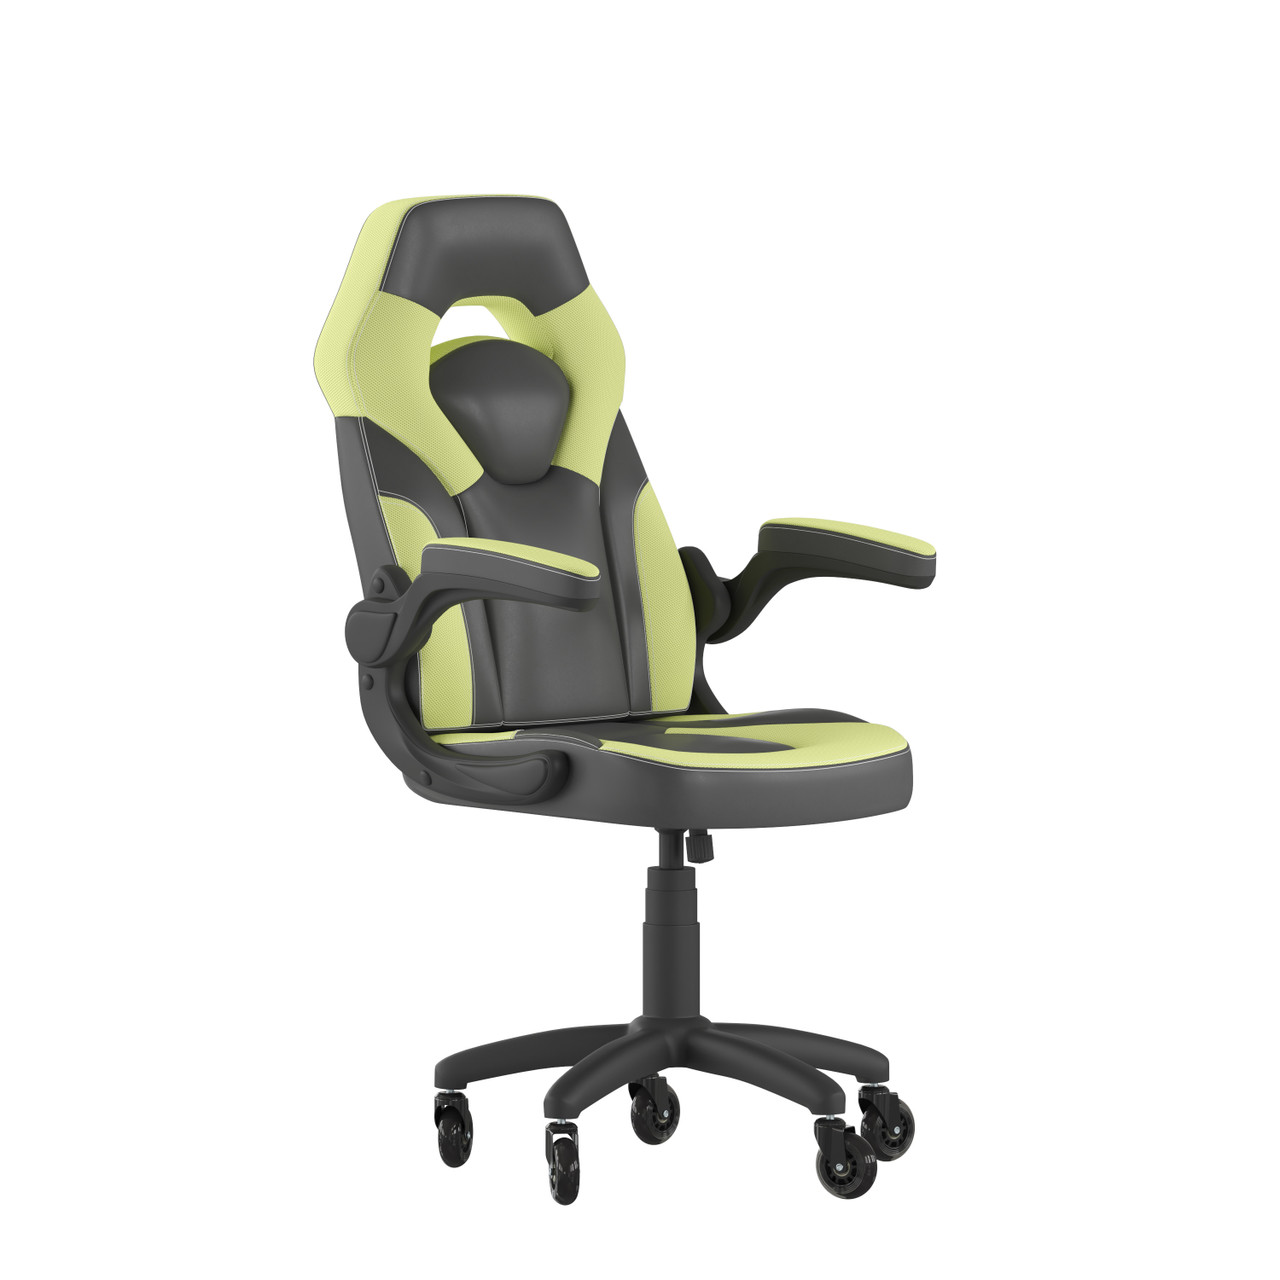 Flash Furniture X10 Gaming Chair Racing Computer PC Adjustable Chair w/ Flip-up Arms & Transparent Roller Wheels, Neon Green/Black LeatherSoft, Model#